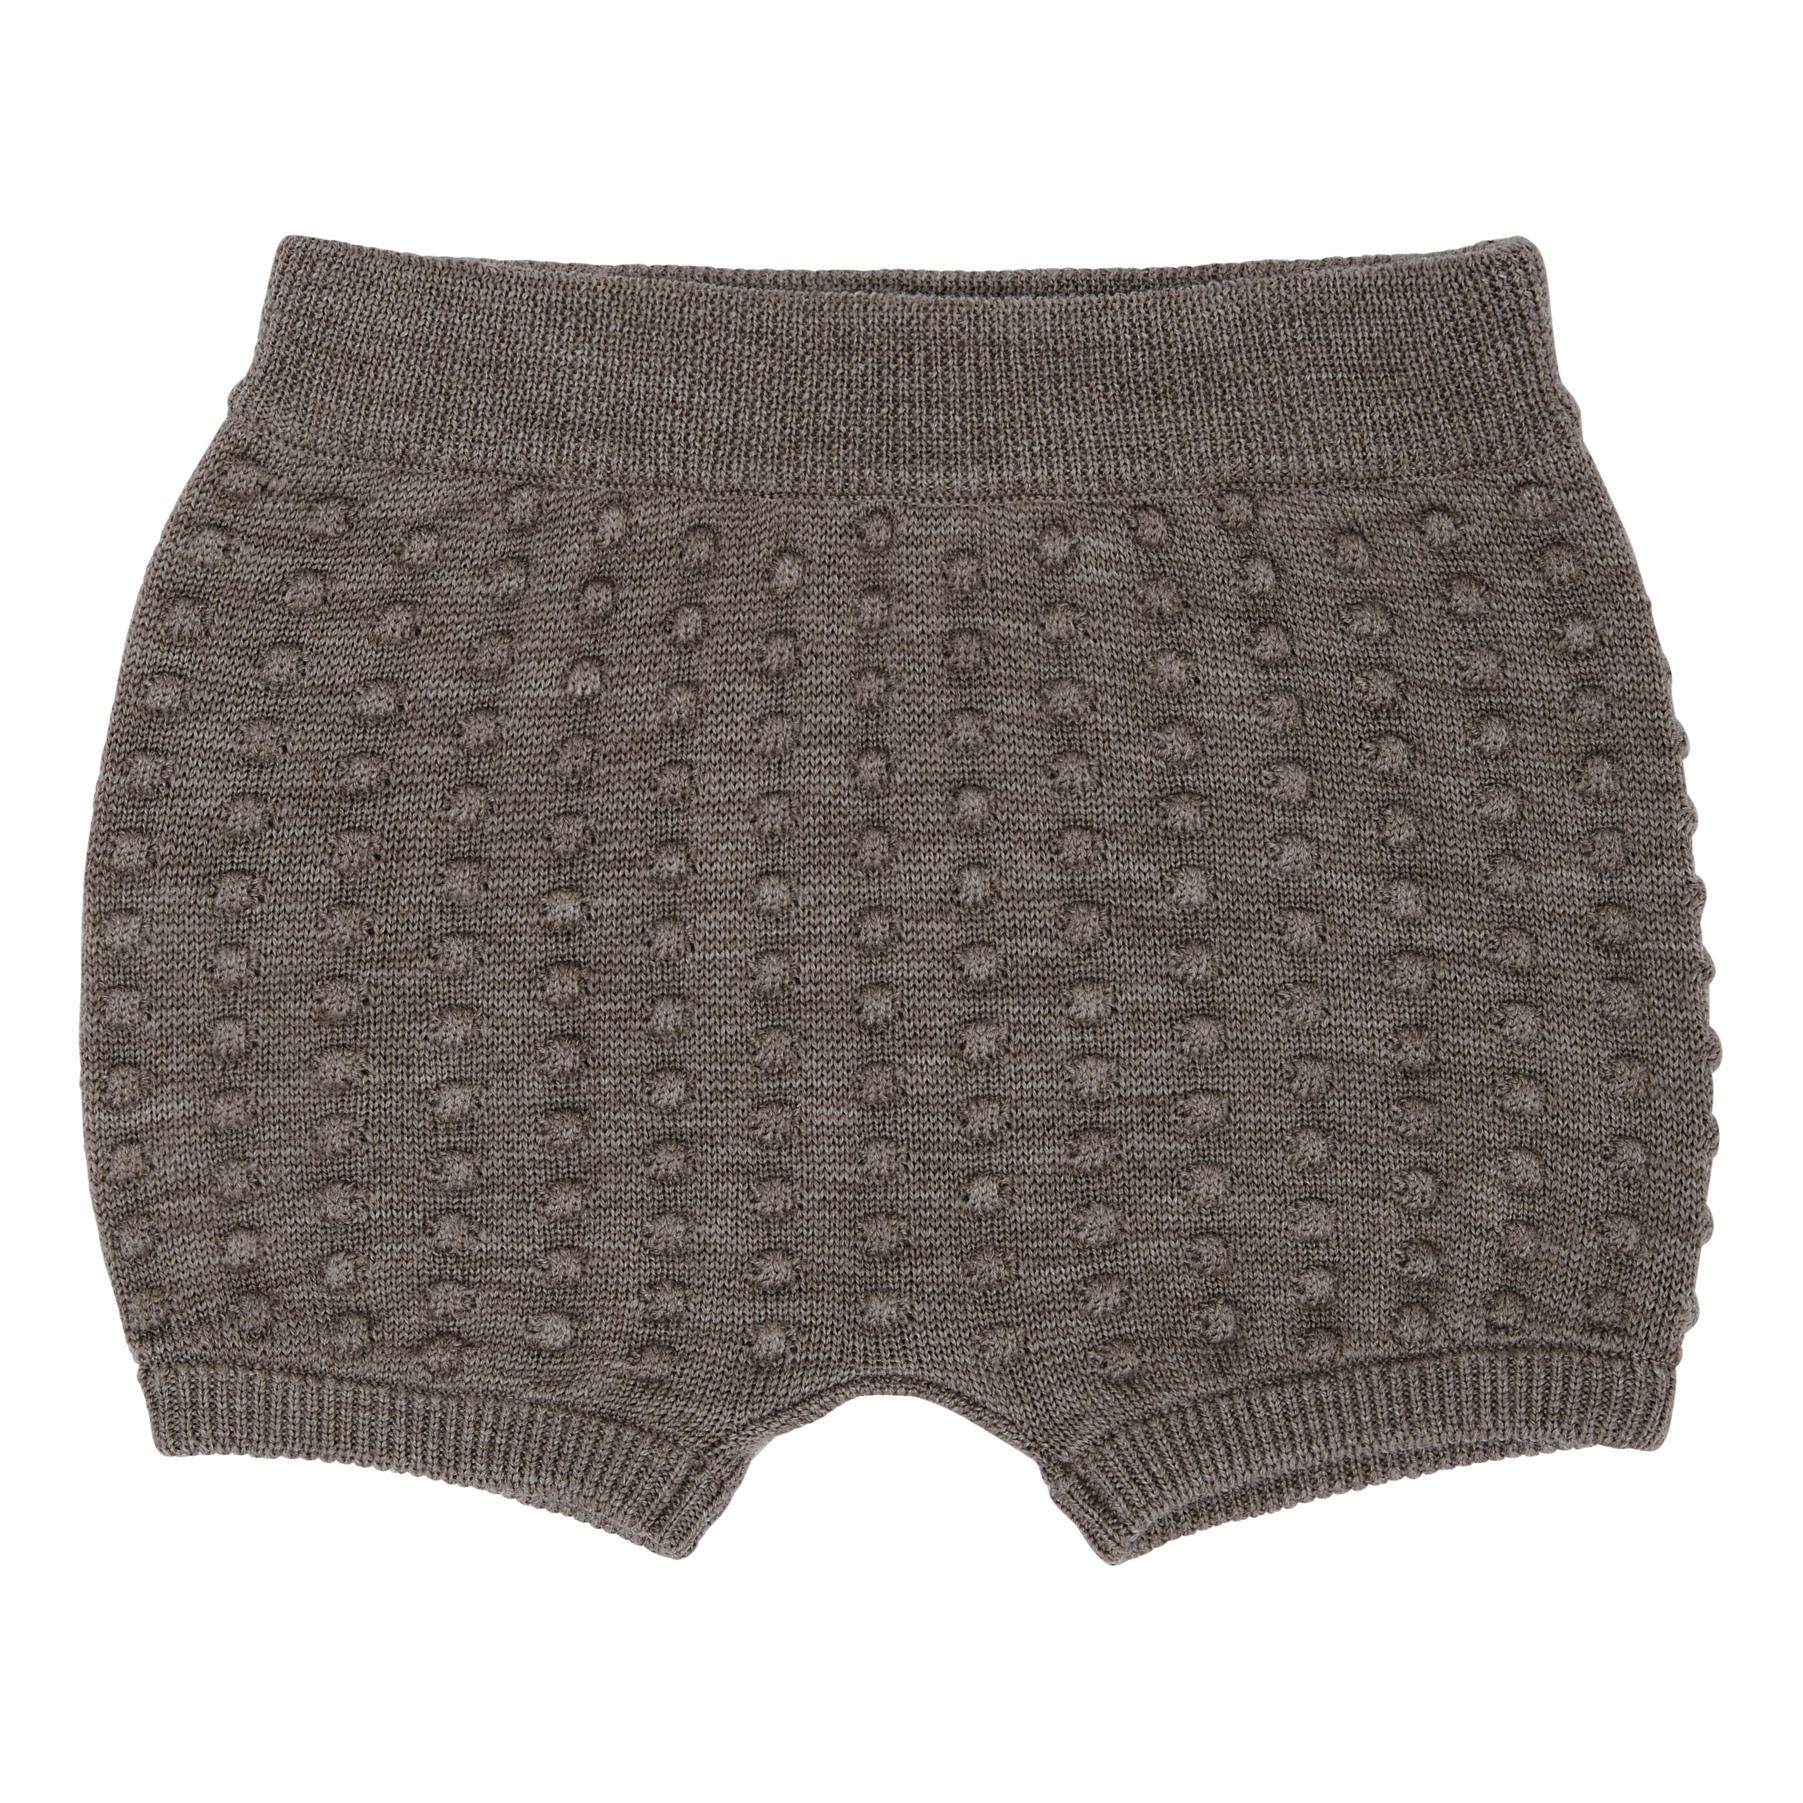 FUB - Bloomer Laine Fine - Fille - Gris taupe